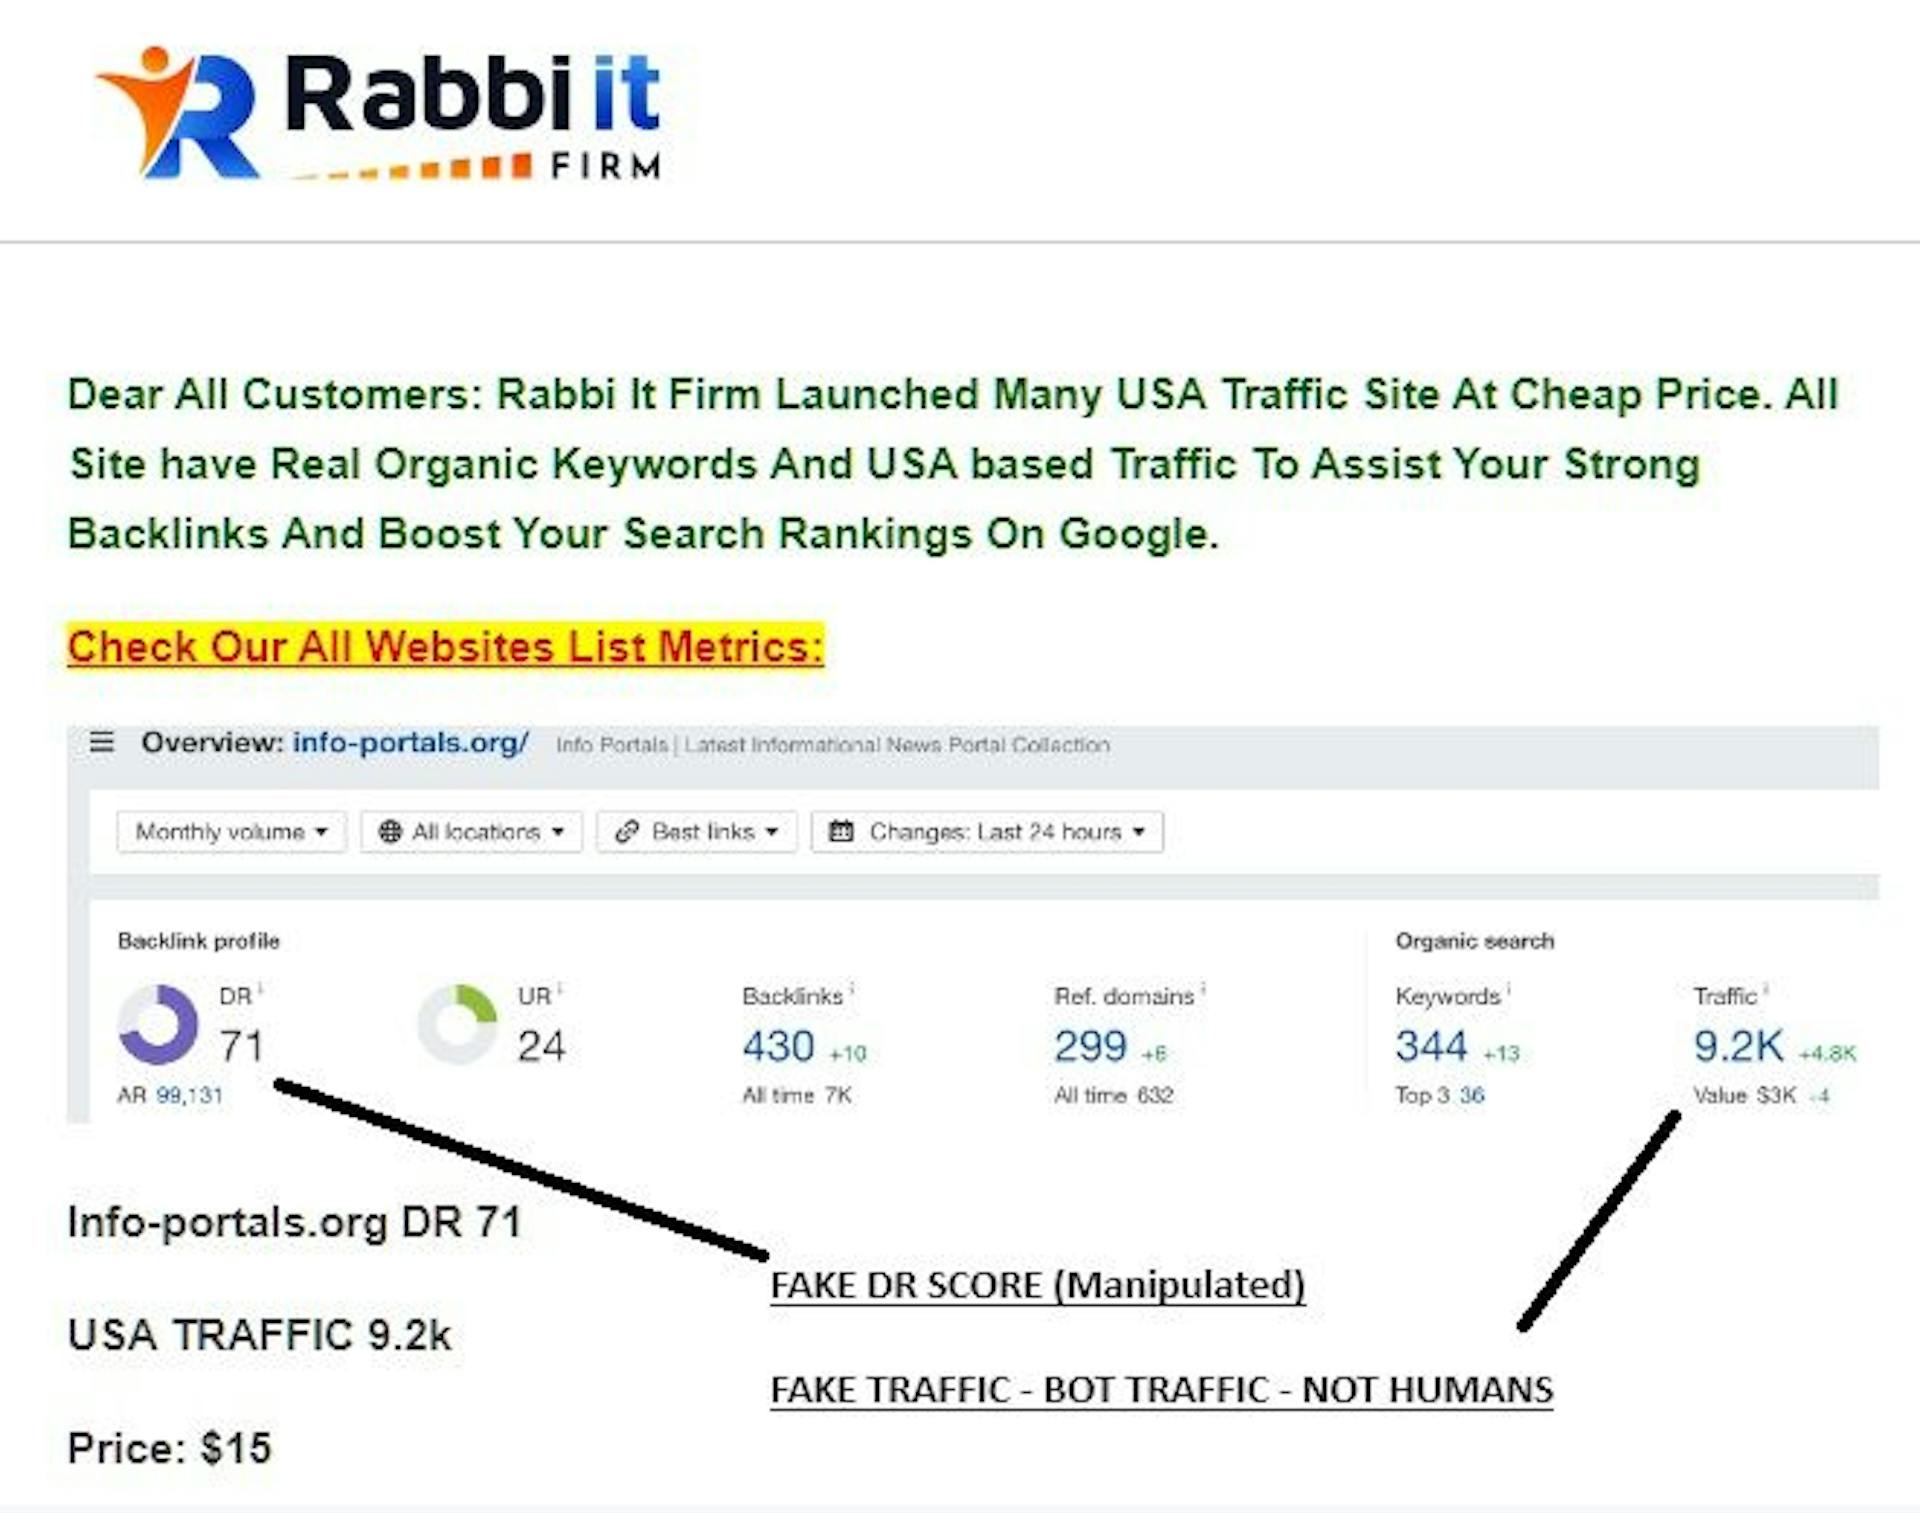 Not a strong backlink - The site is full of spam links and use of fake traffic bots - (Site has a true organic authority of DR 9 *Estimated*) - Ahrefs Metrics - With just 299 referring domains a DR score of 71 is basically organically impossible in the real world.  - Spam Email 